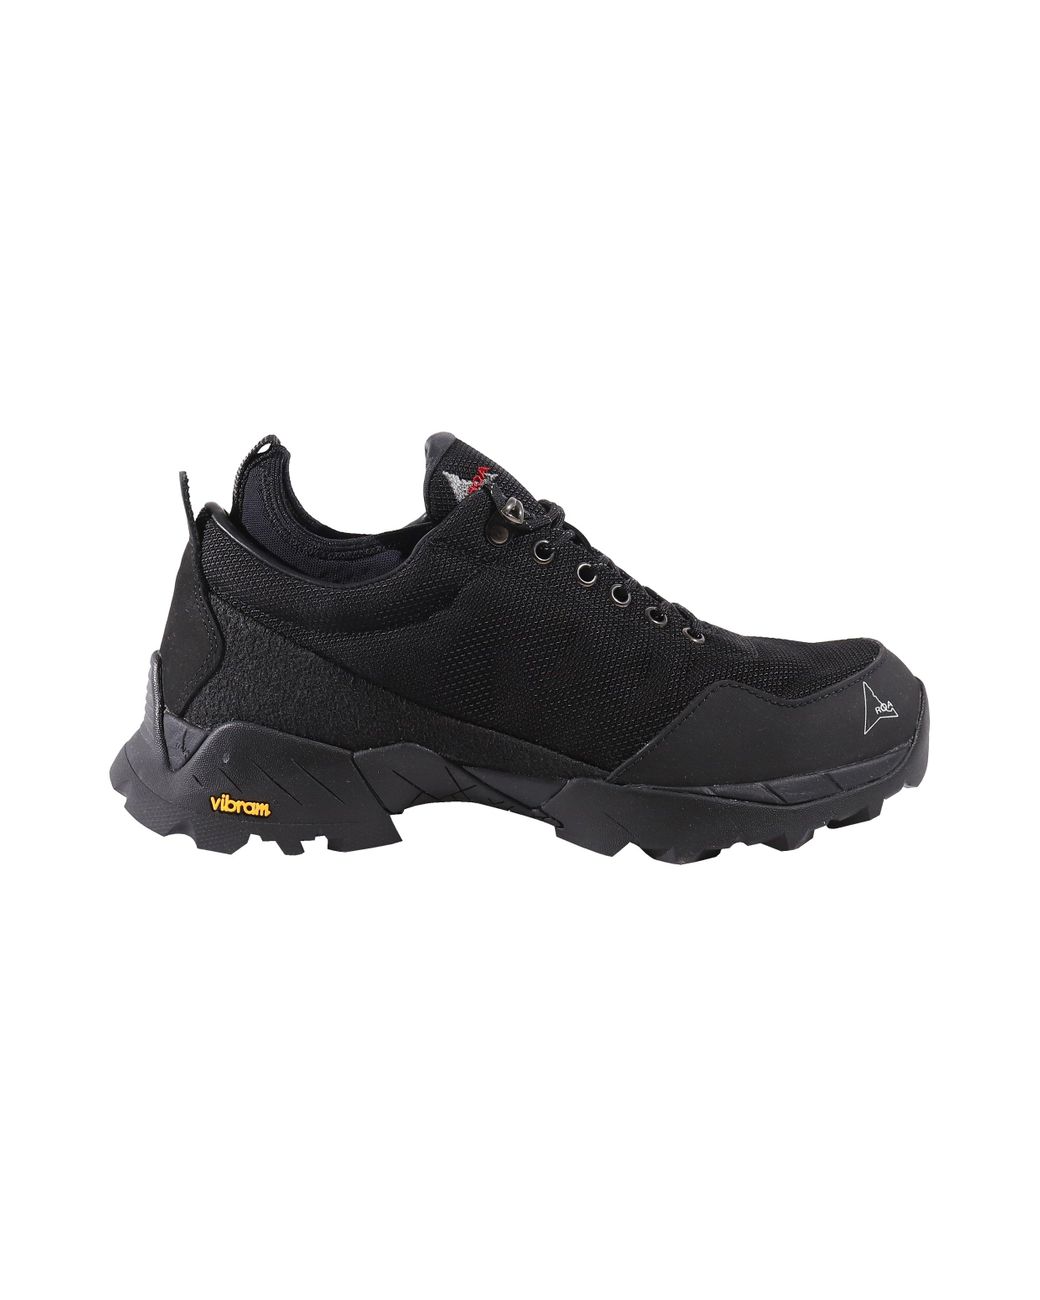 Neal Mesh Hiking Shoes Atterley Men Shoes Outdoor Shoes 